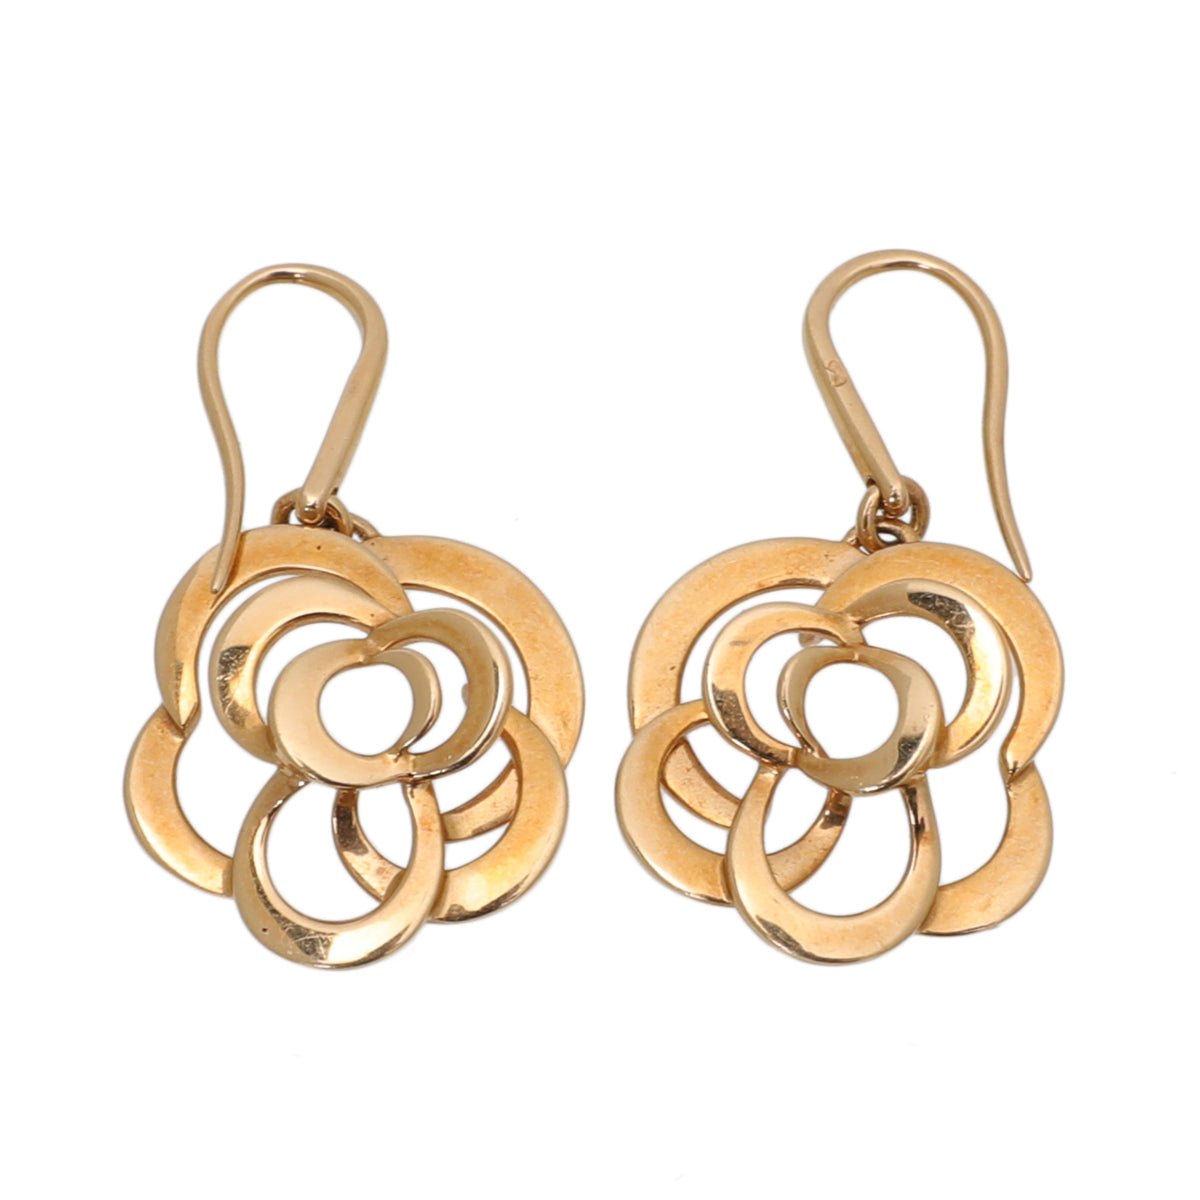 Load image into Gallery viewer, The Closet - Chanel 18K Yellow Gold Fil De Camelia Earrings | The Closet
